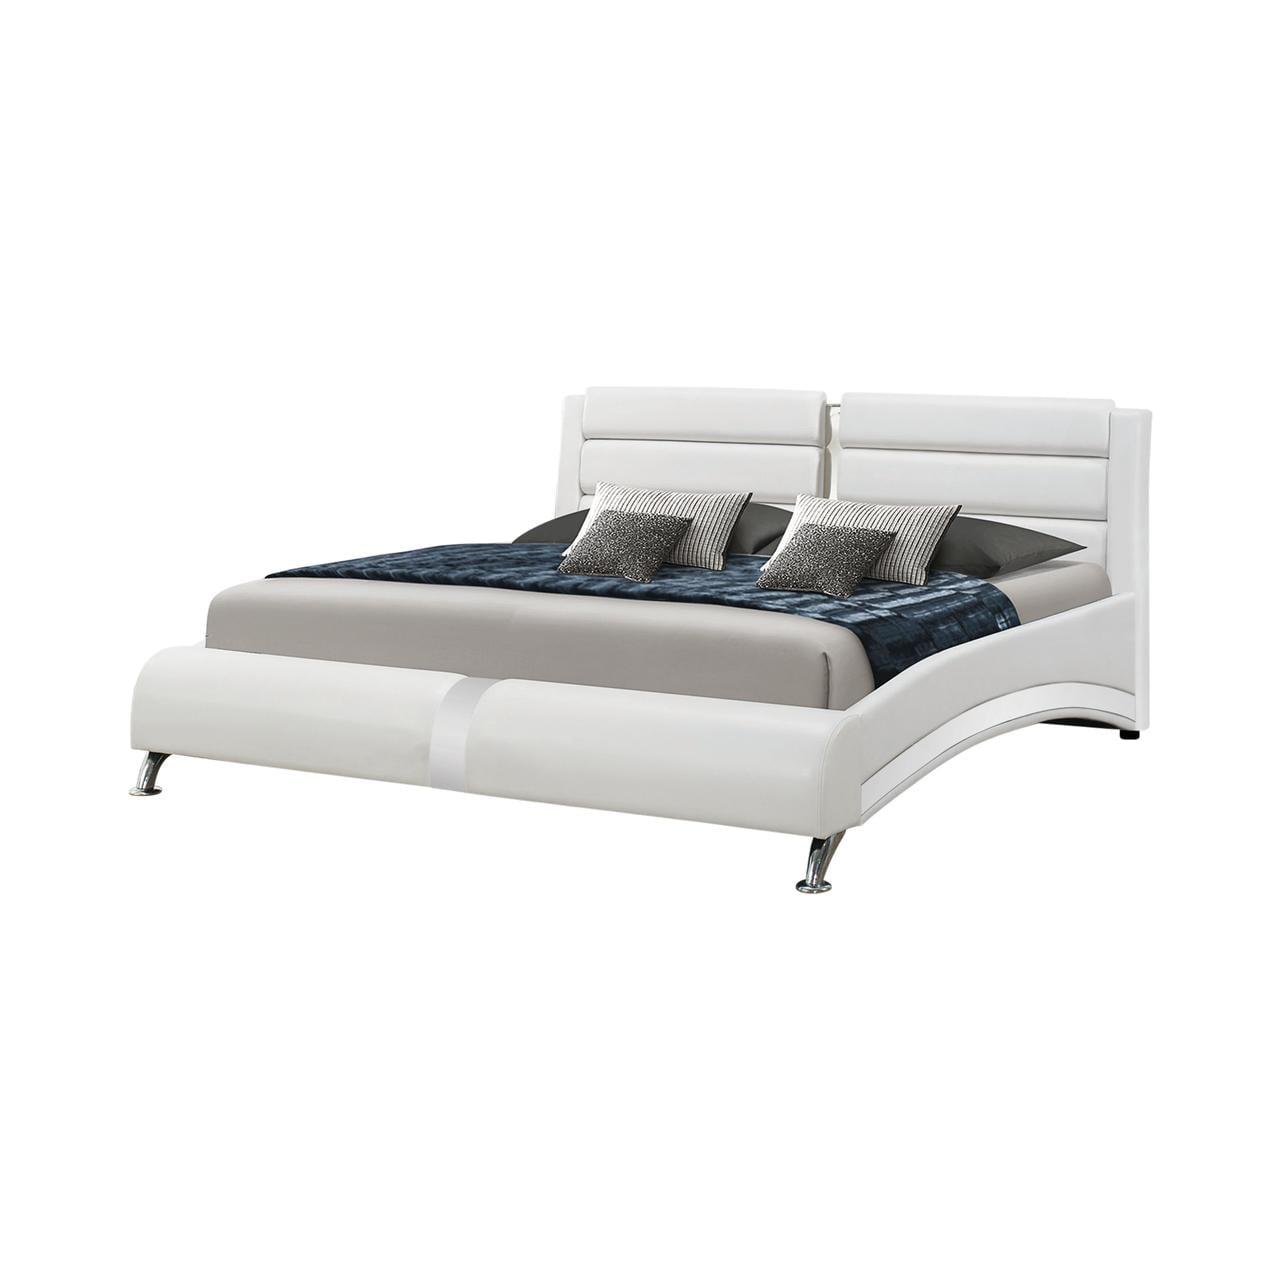 Sleek Chrome-Accented California King Bed with White Faux Leather Upholstery